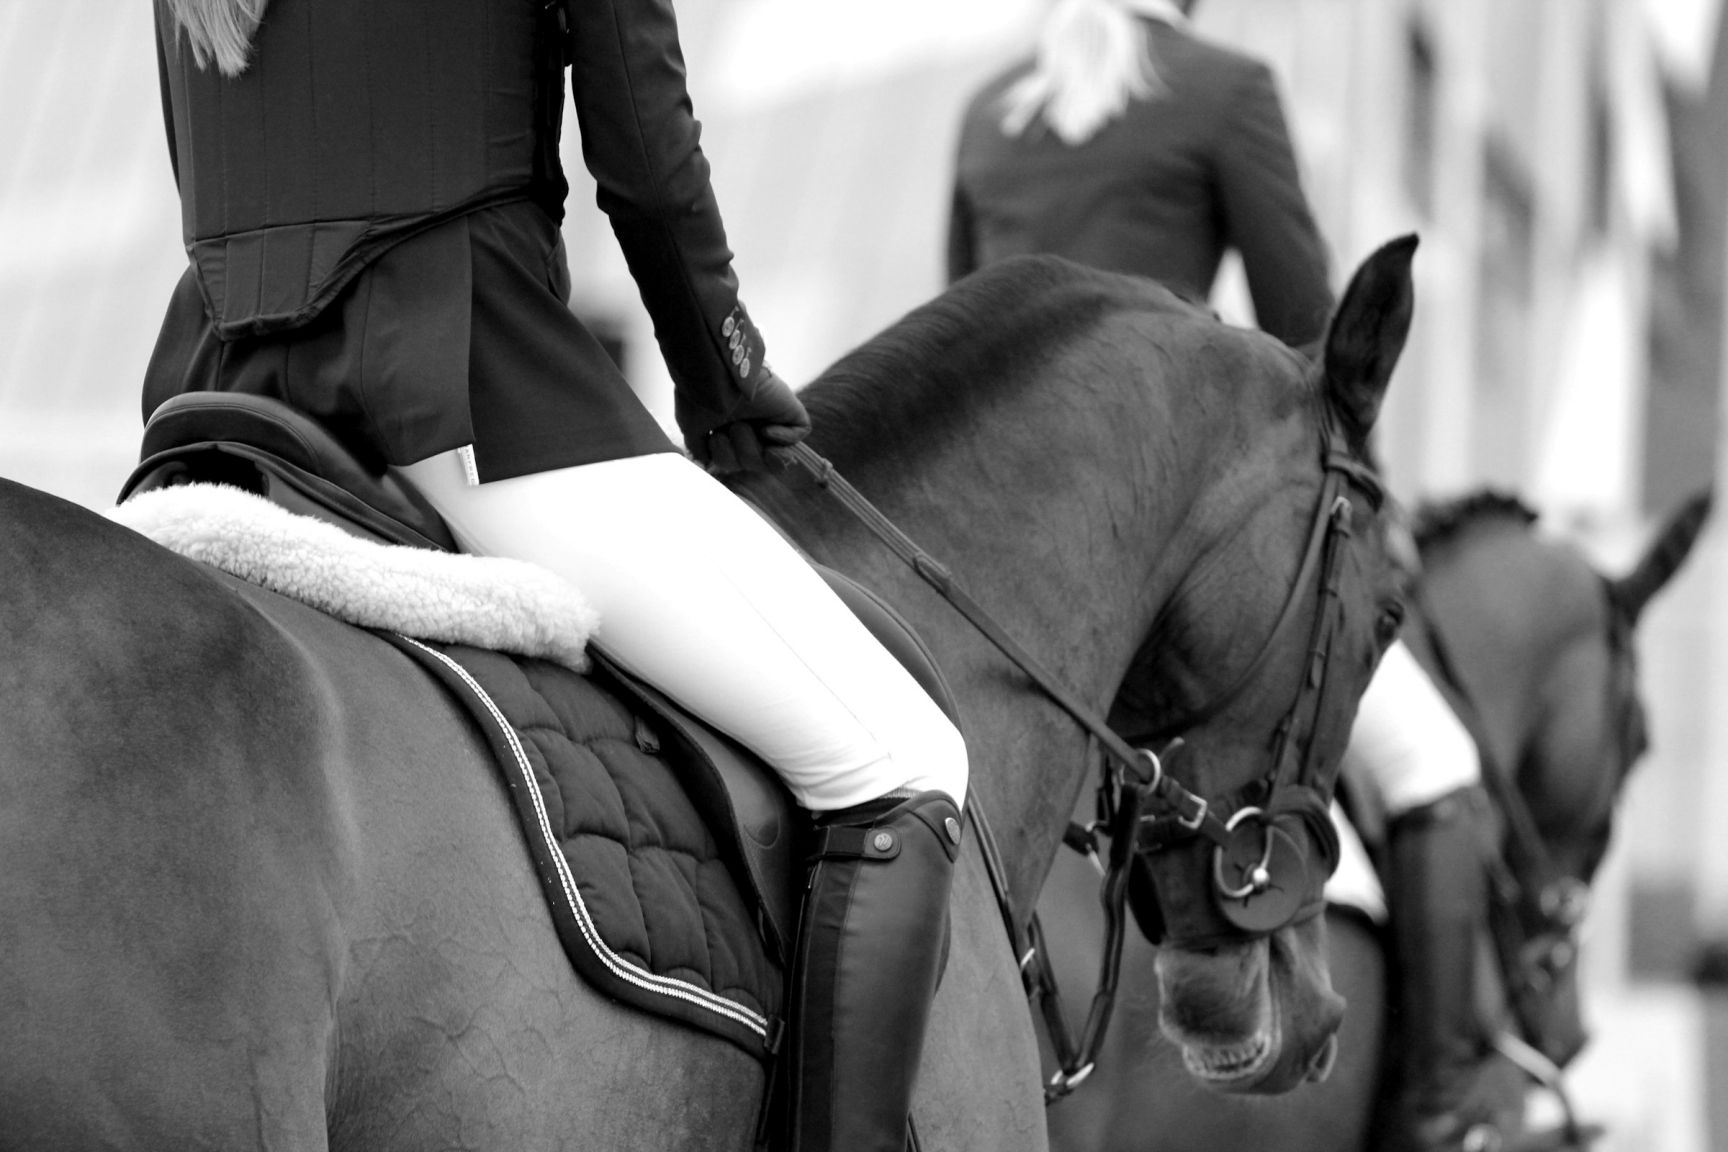 how big is the equestrian market? Size, Diversity, and Opportunities